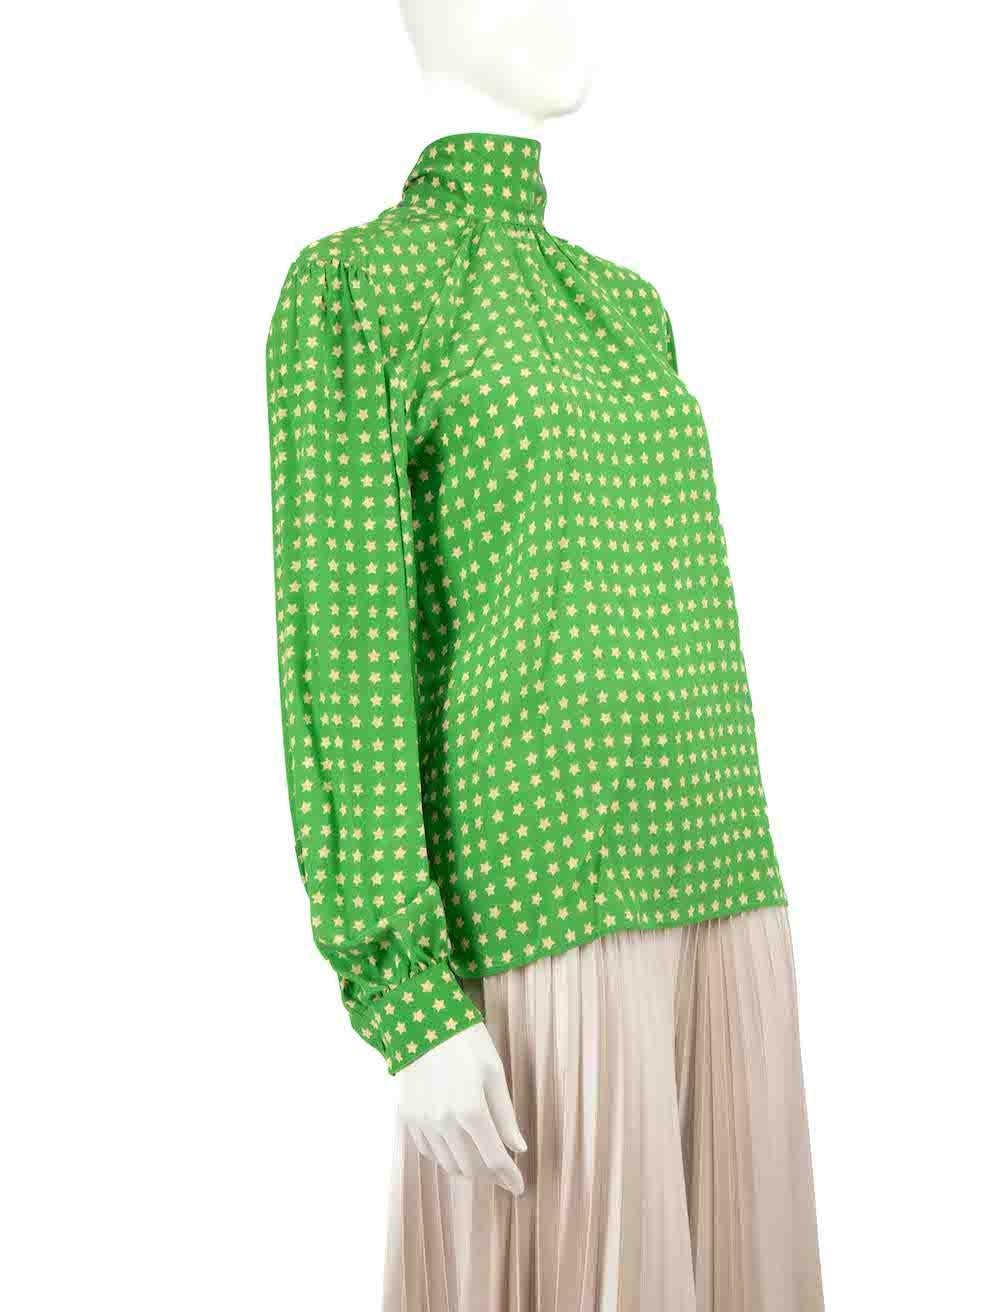 CONDITION is Very good. Hardly any visible wear to blouse is evident on this used Saint Laurent designer resale item.
 
 Details
 Green
 Silk
 Long sleeves blouse
 Star pattern
Tie neck strap with button
Buttoned cuffs
Mock neckline

Made in Italy
